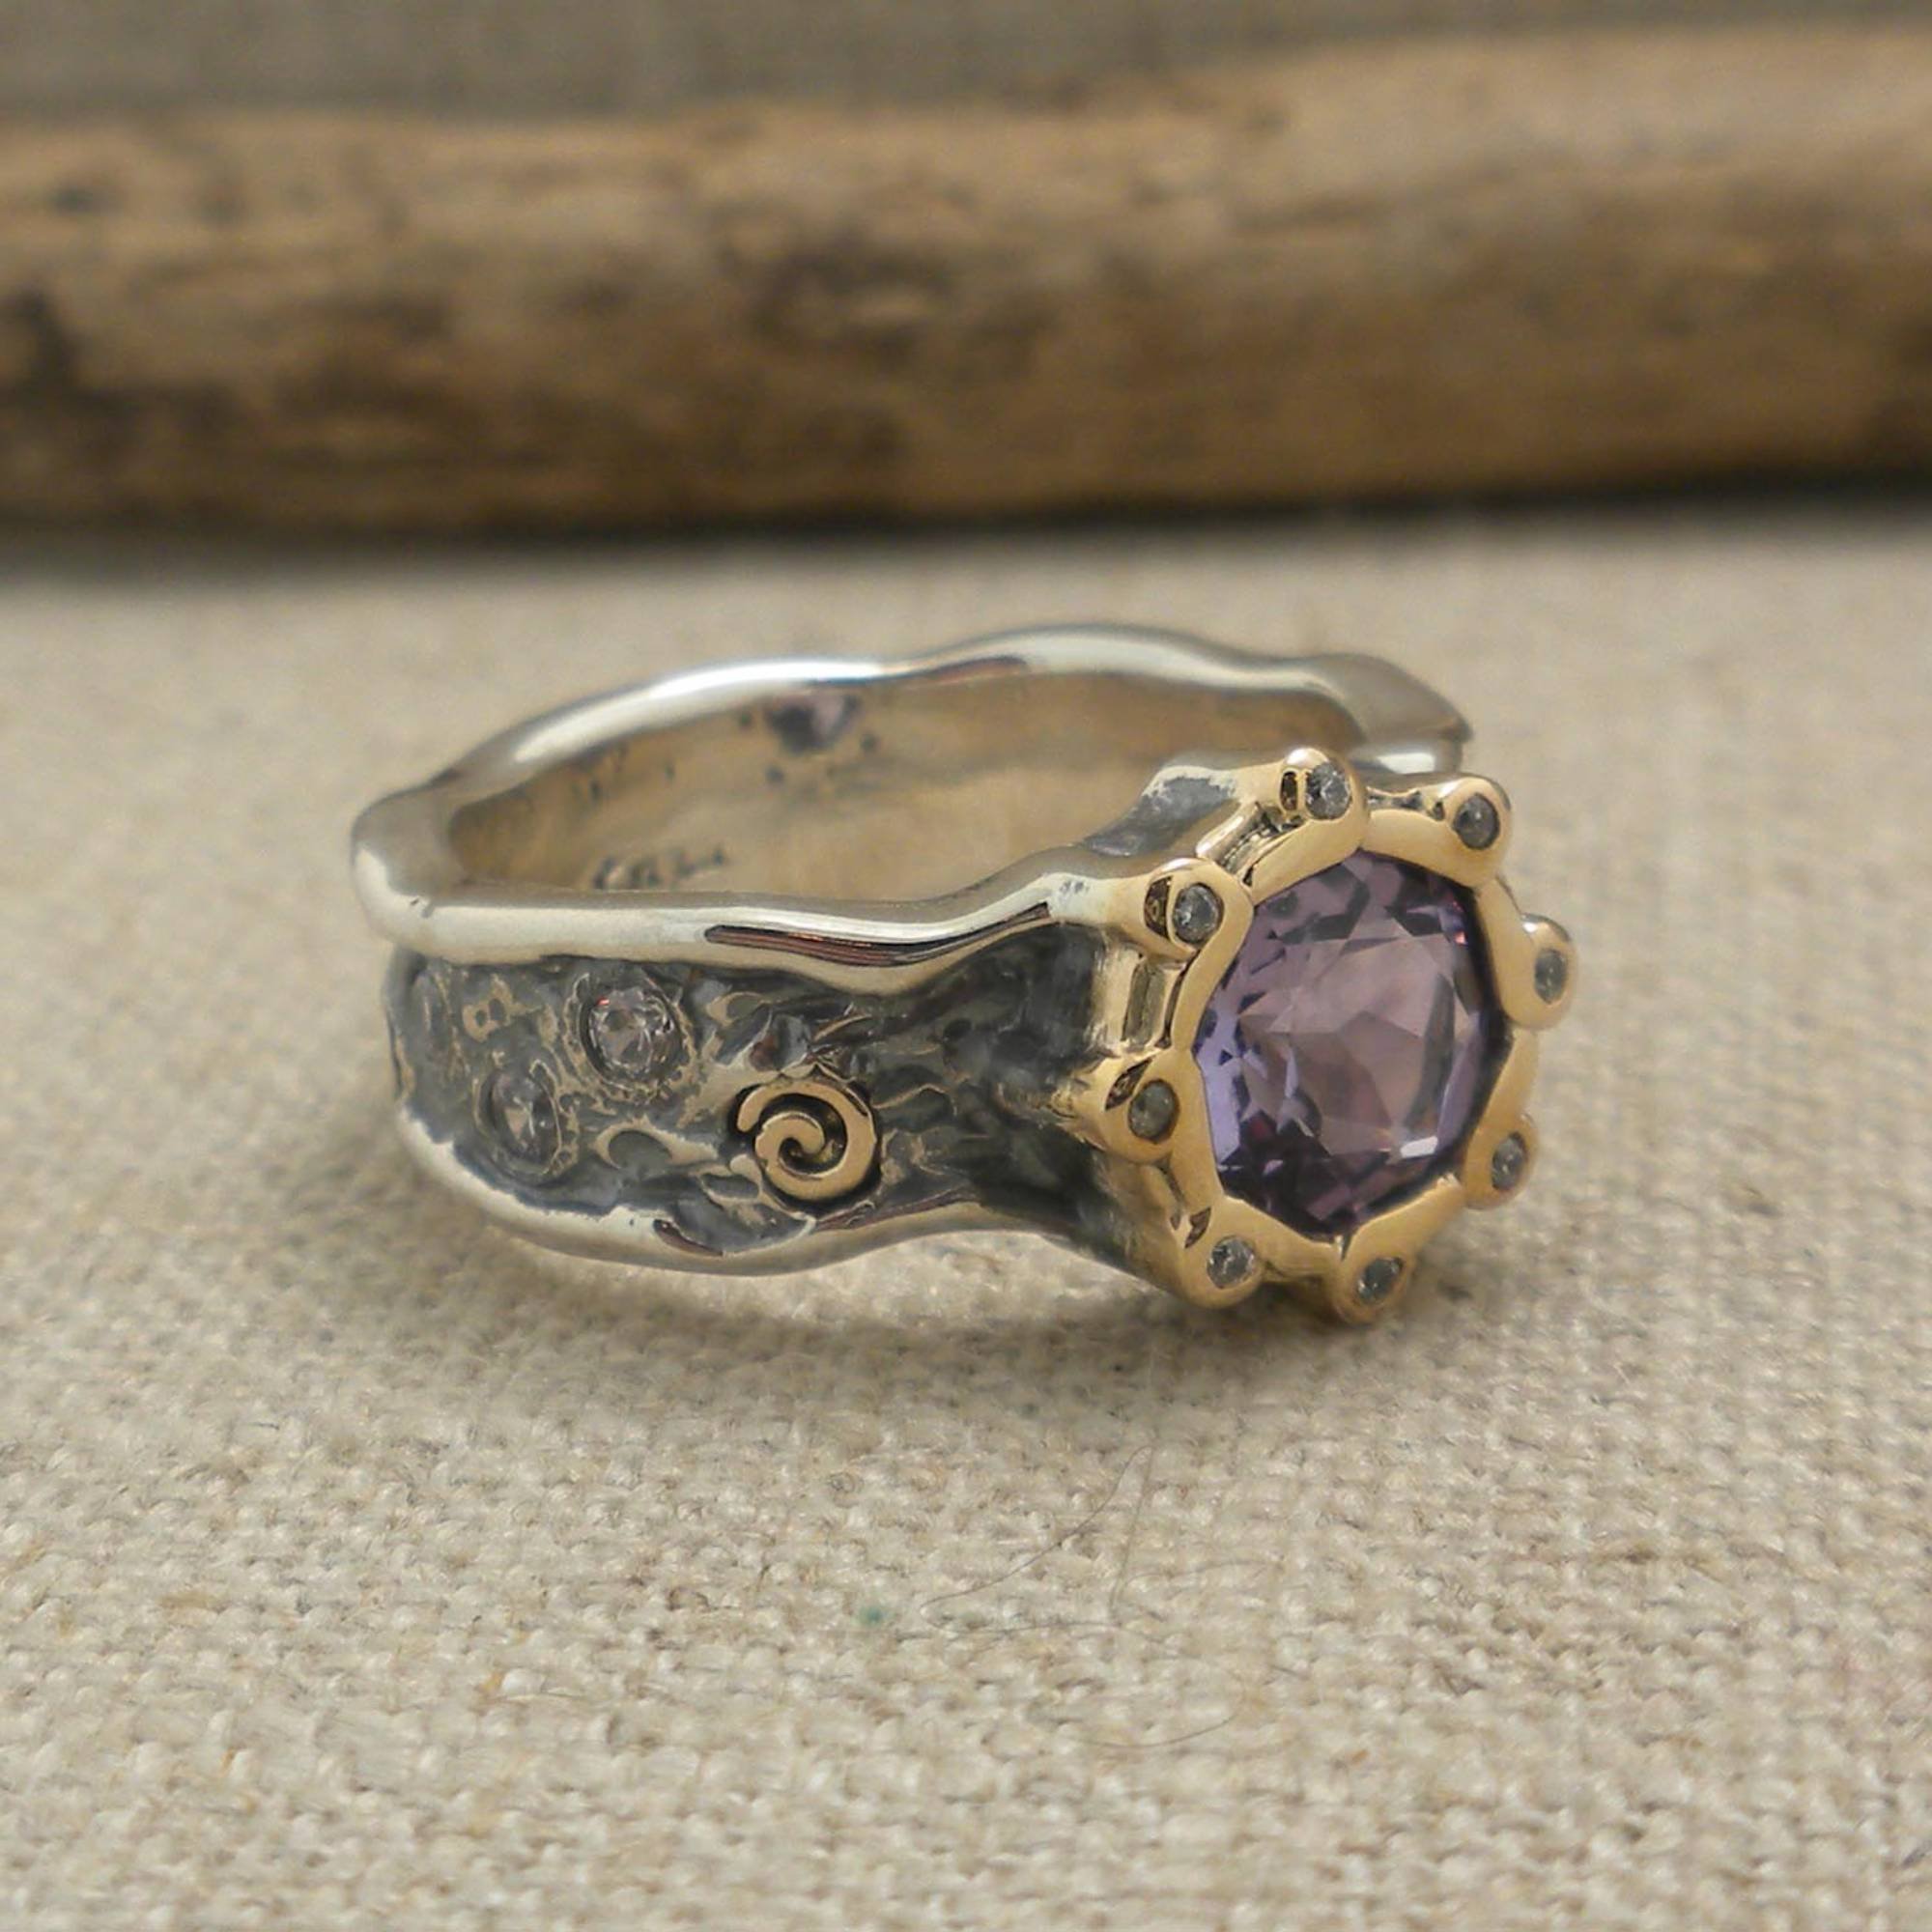 Amethyst Ring with CZs by Keith Jack 